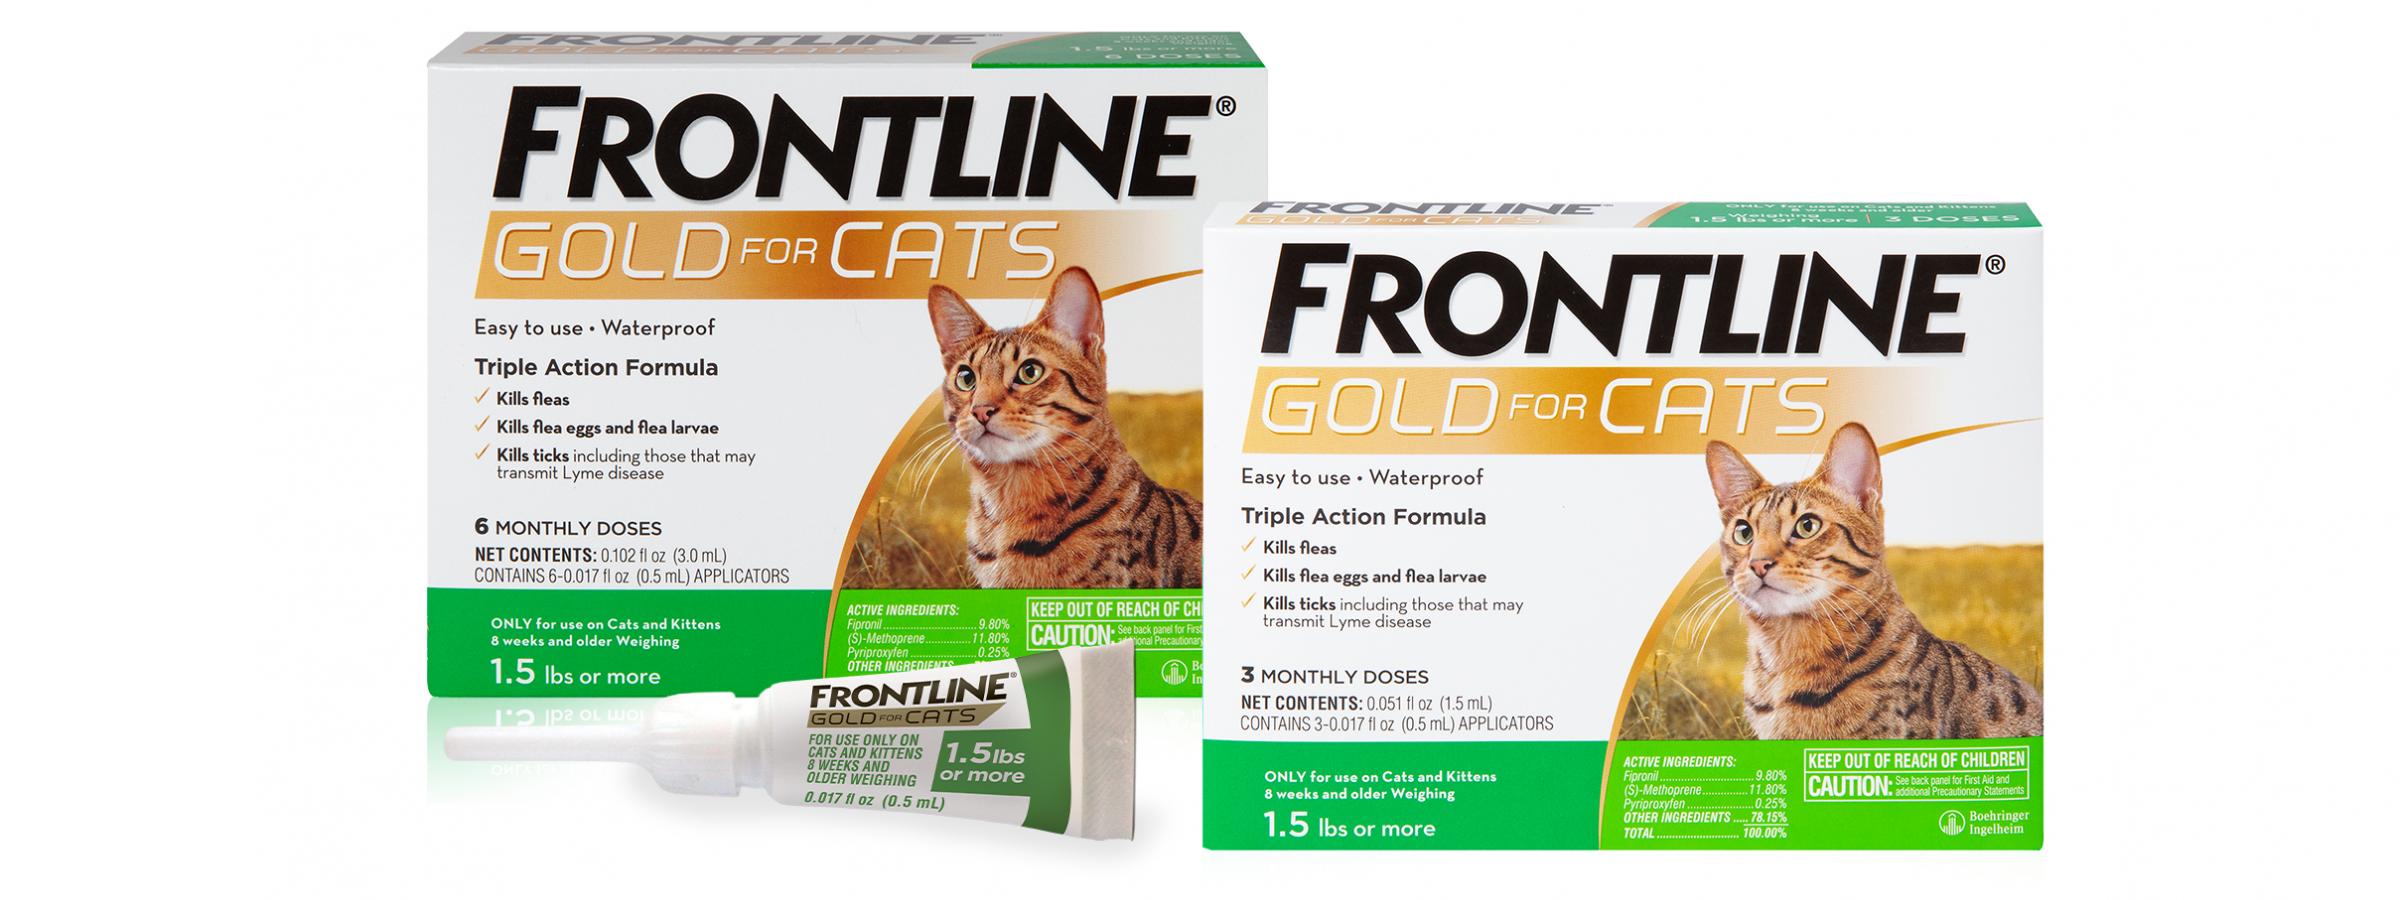 frontline-gold-for-cats